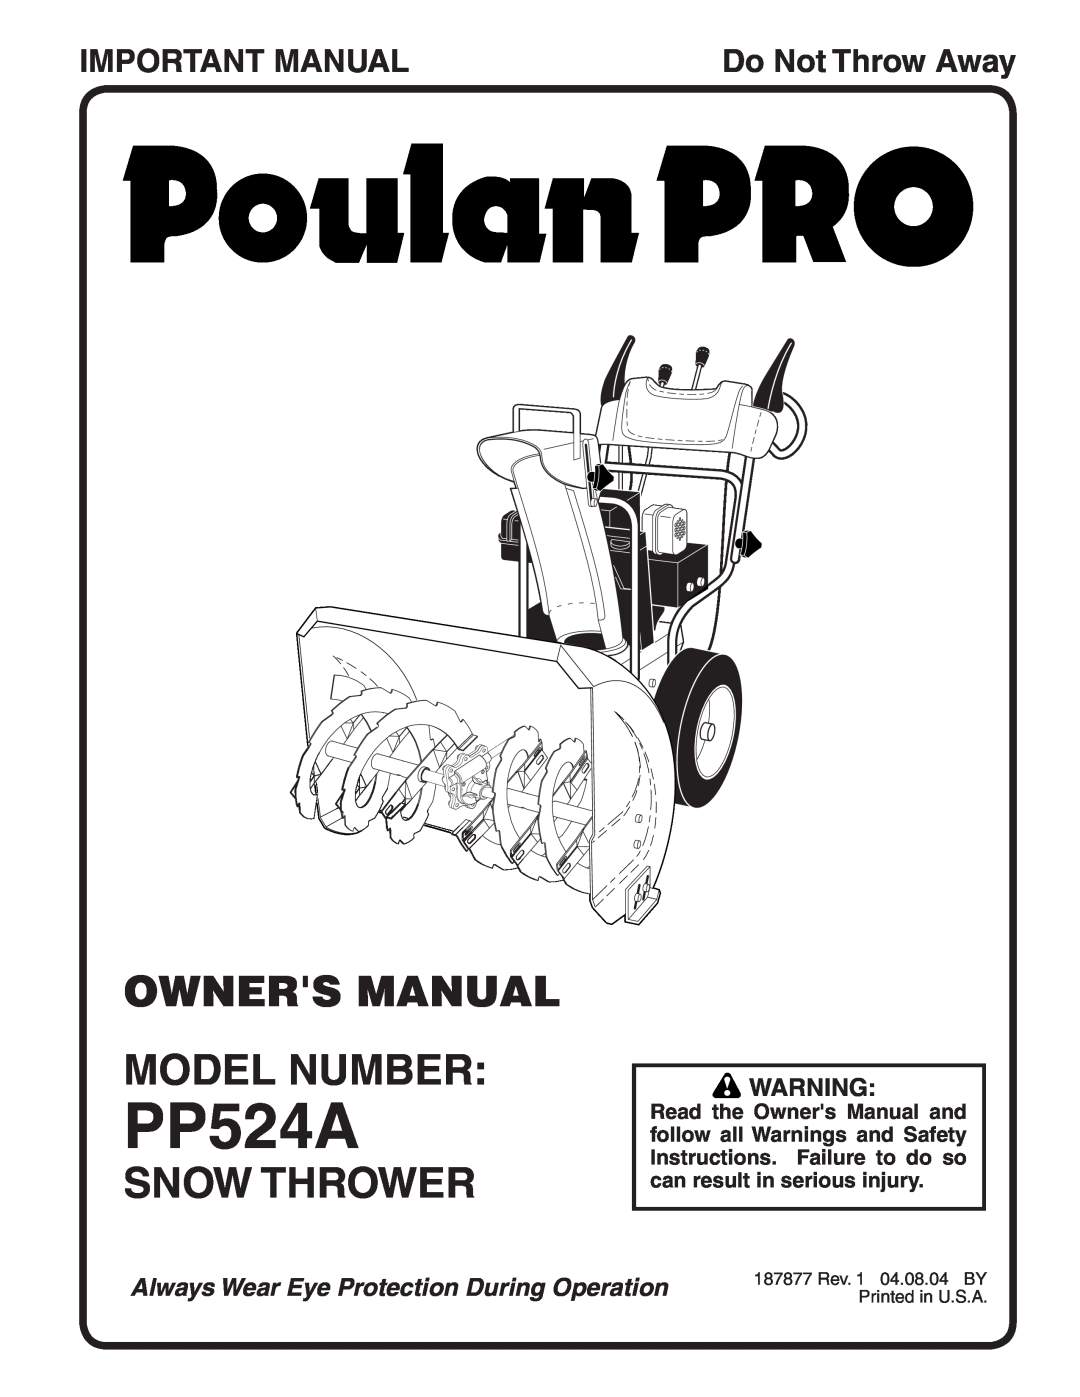 Poulan 187877 owner manual Snow Thrower, Important Manual, PP524A, Do Not Throw Away 